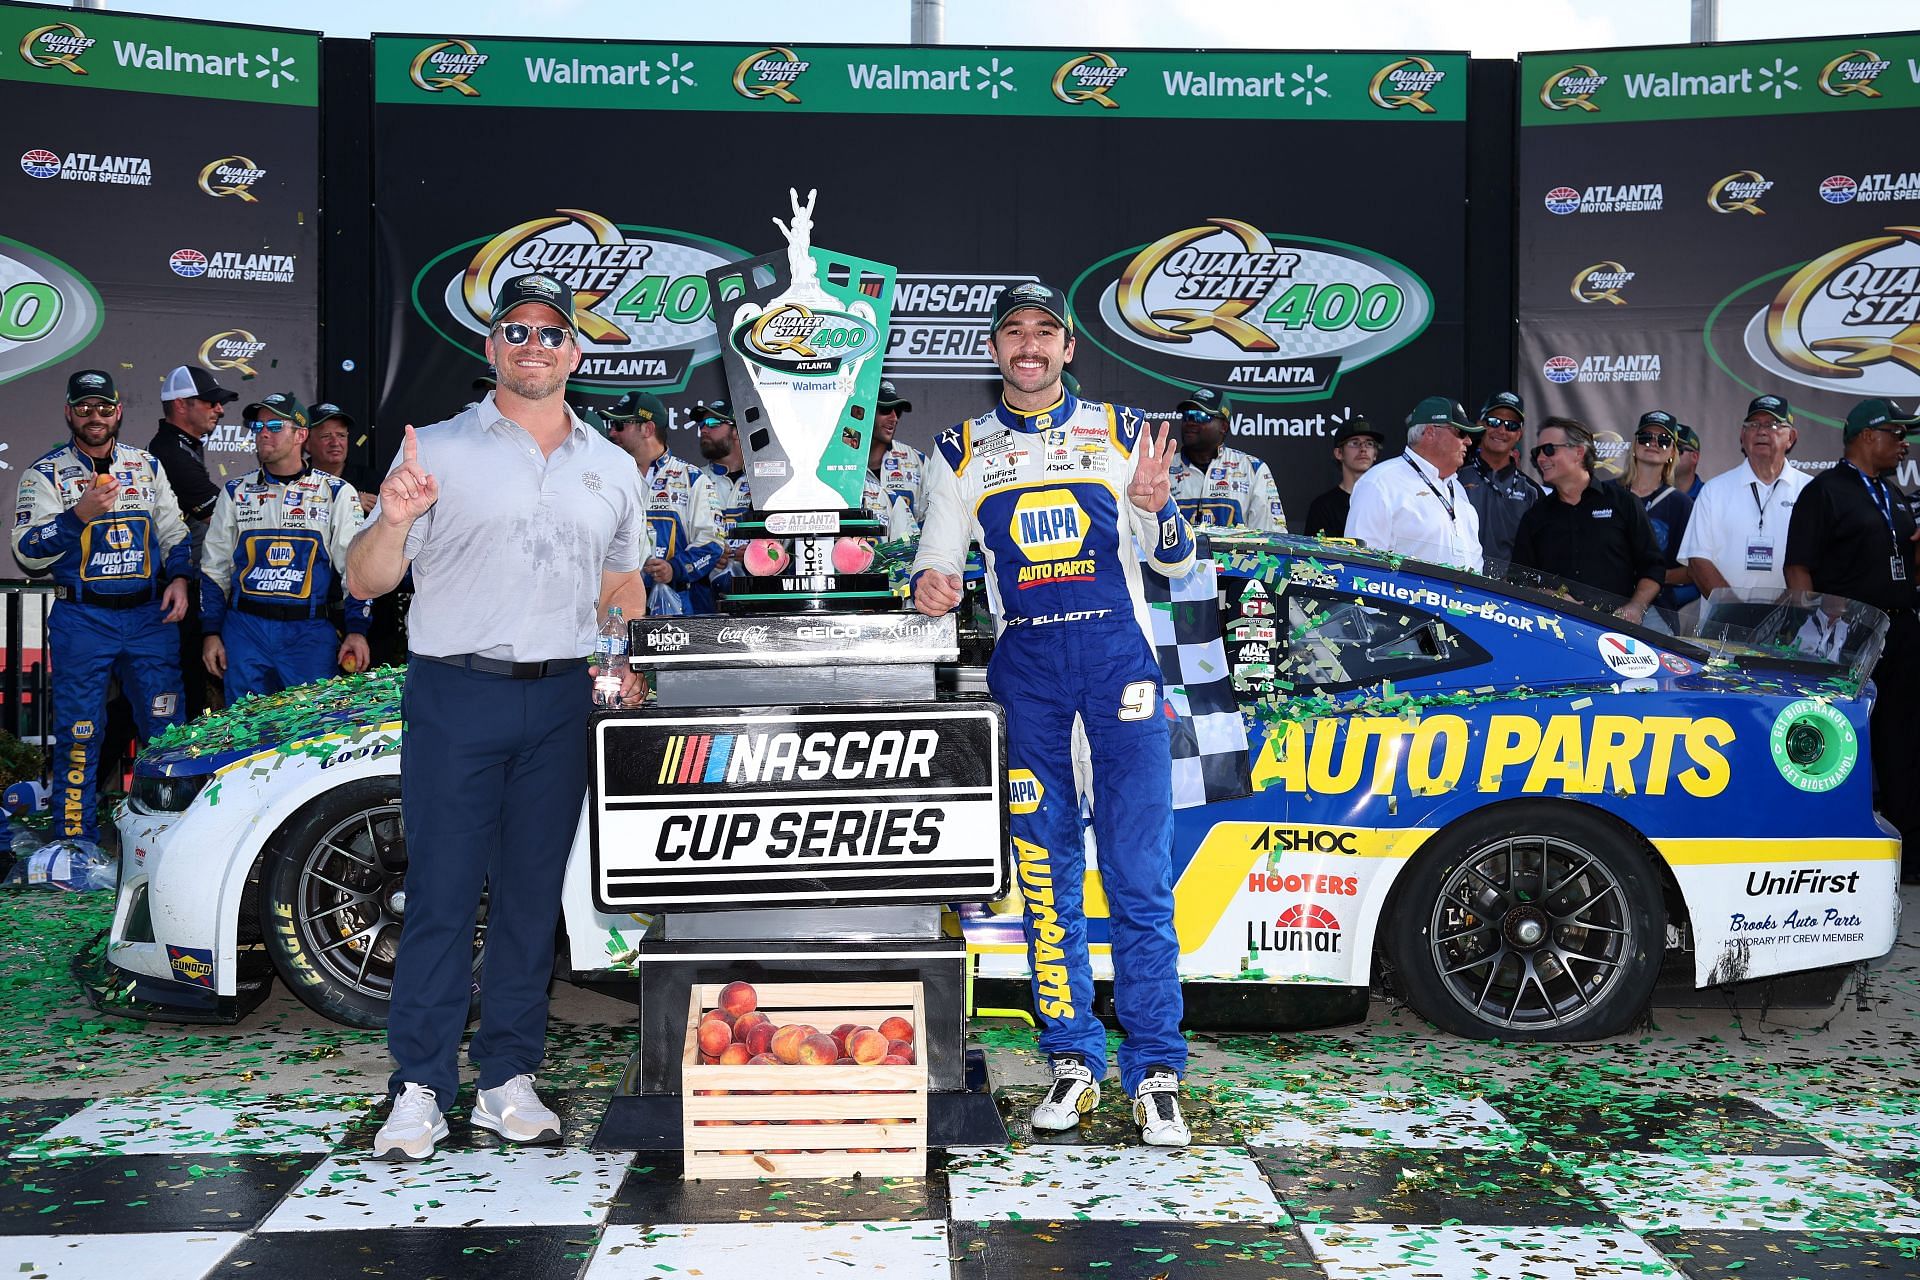 Chase Elliott poses with Marcus Smith, President and CEO, Speedway Motorsports in victory lane after winning the NASCAR Cup Series Quaker State 400 at Atlanta Motor Speedway (Photo by James Gilbert/Getty Images)